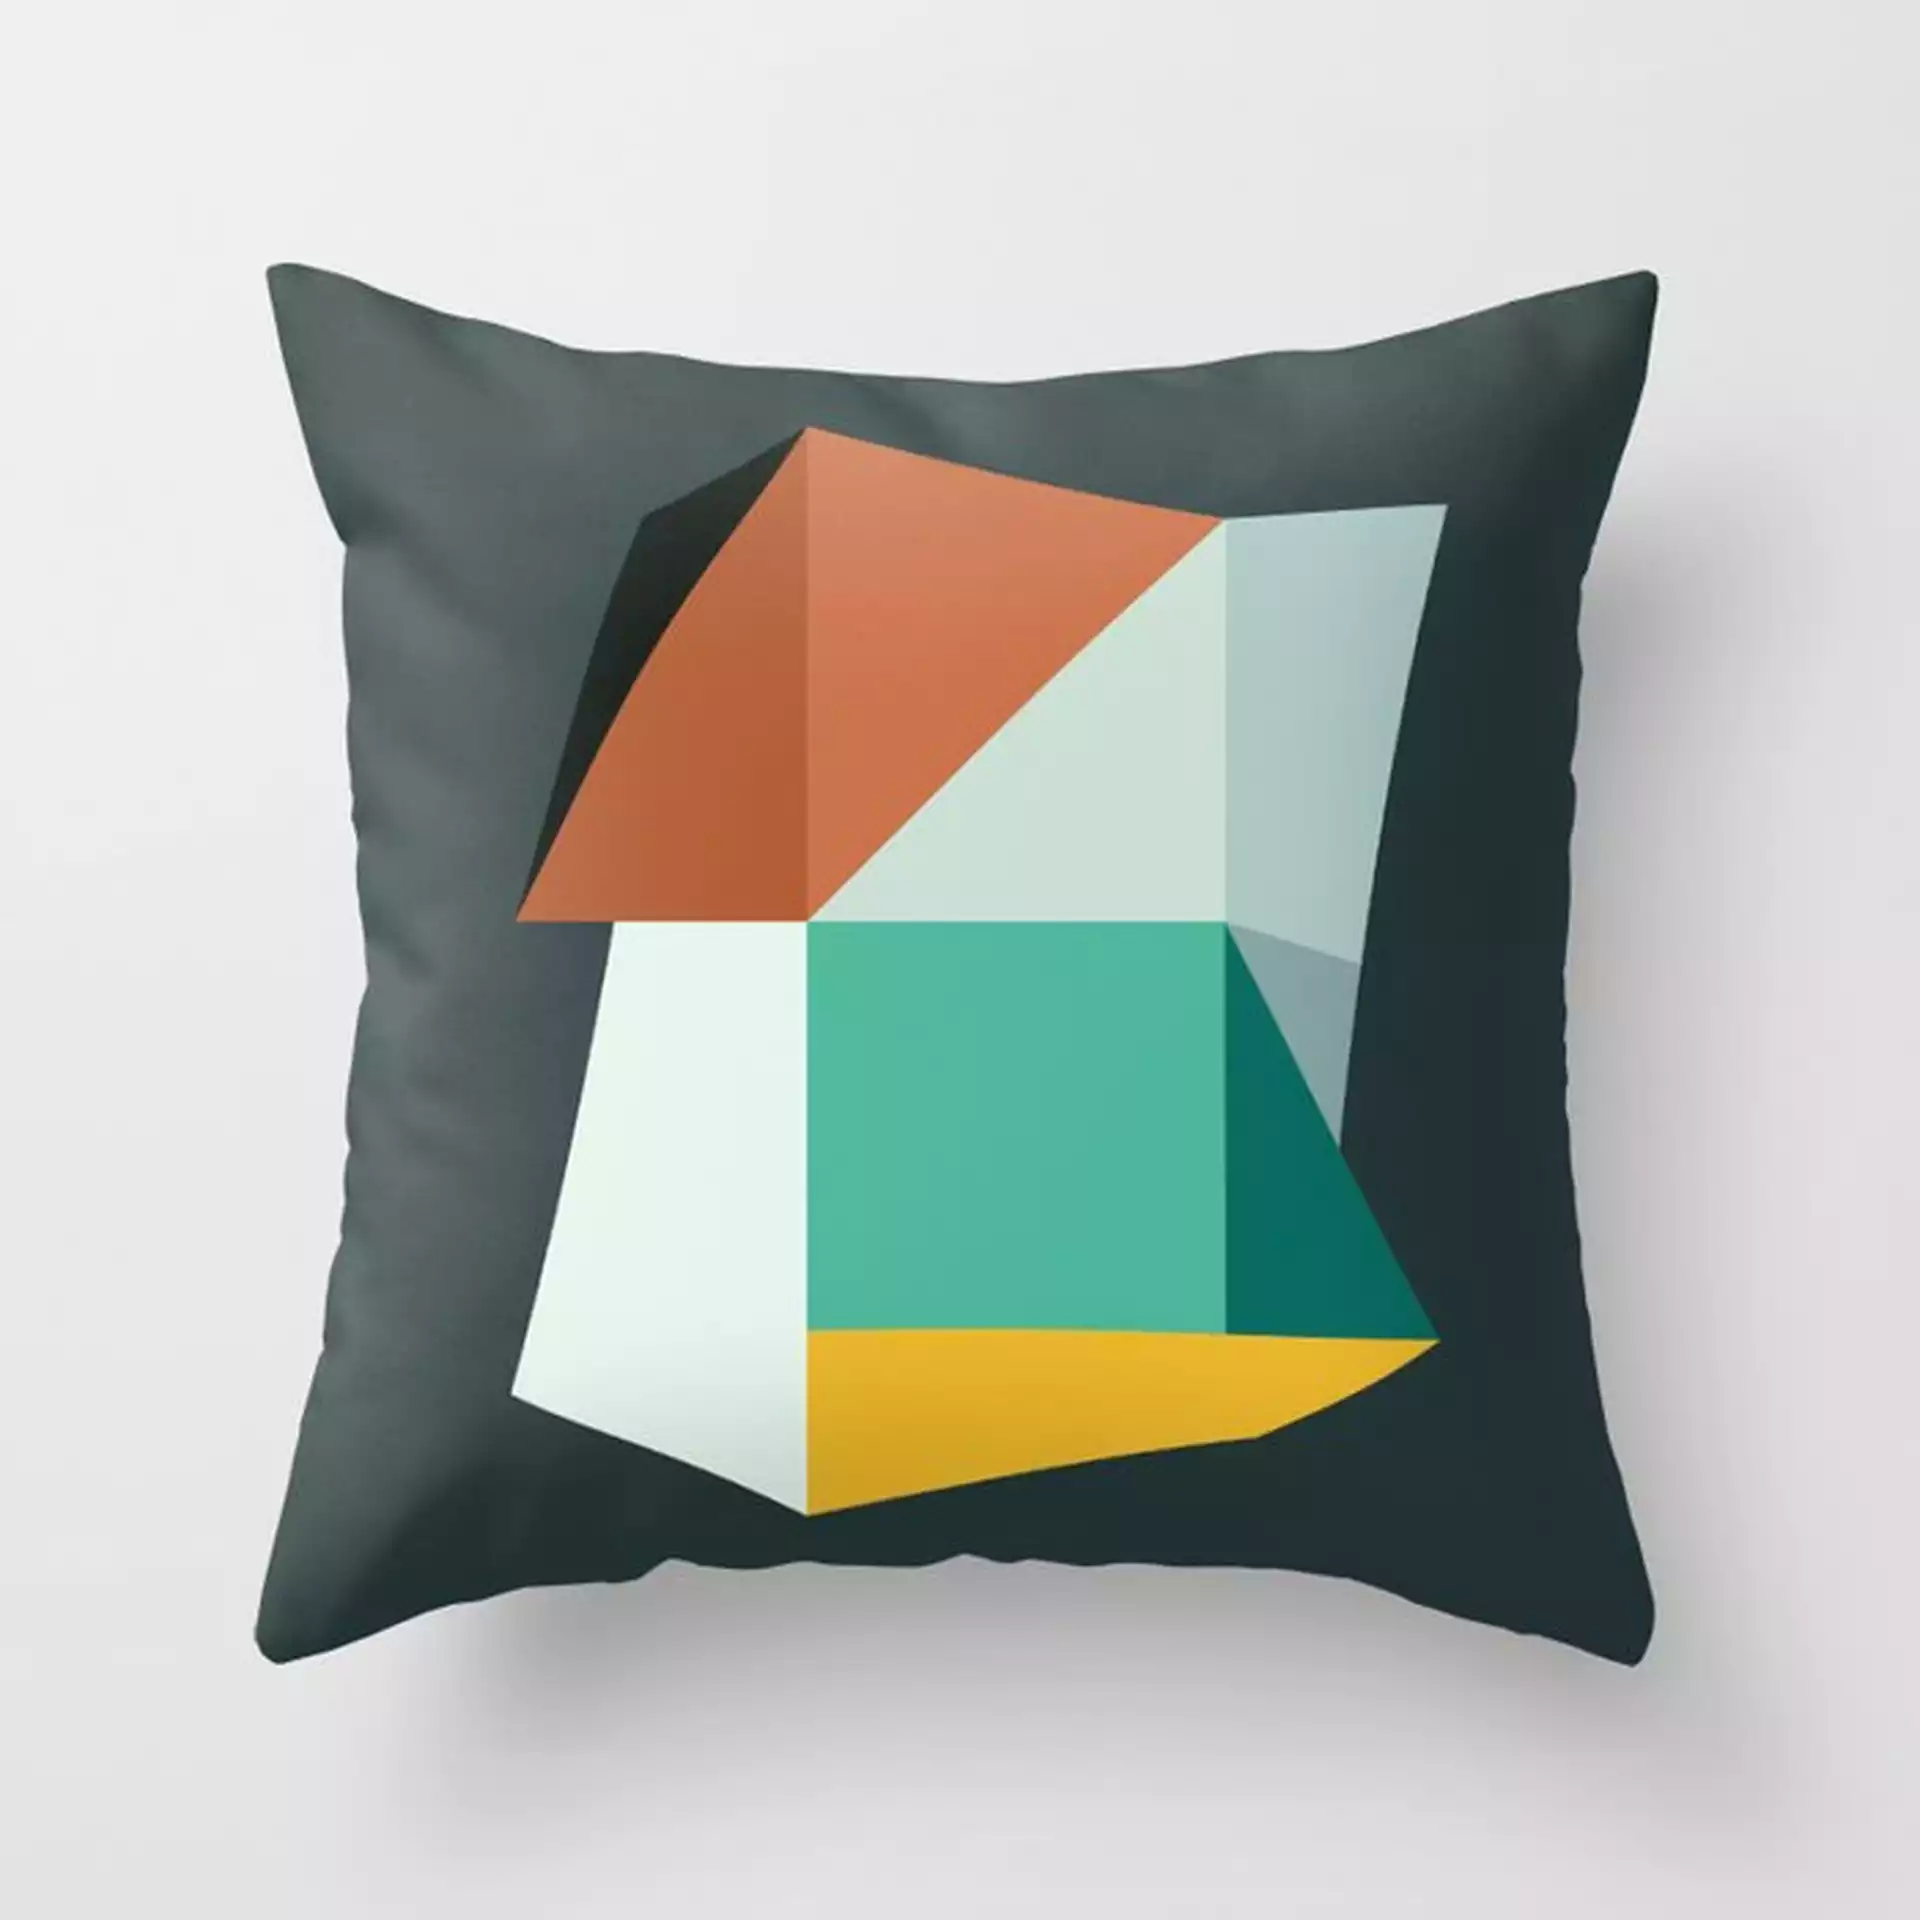 Modern Geometric 75b Couch Throw Pillow by The Old Art Studio - Cover (24" x 24") with pillow insert - Indoor Pillow